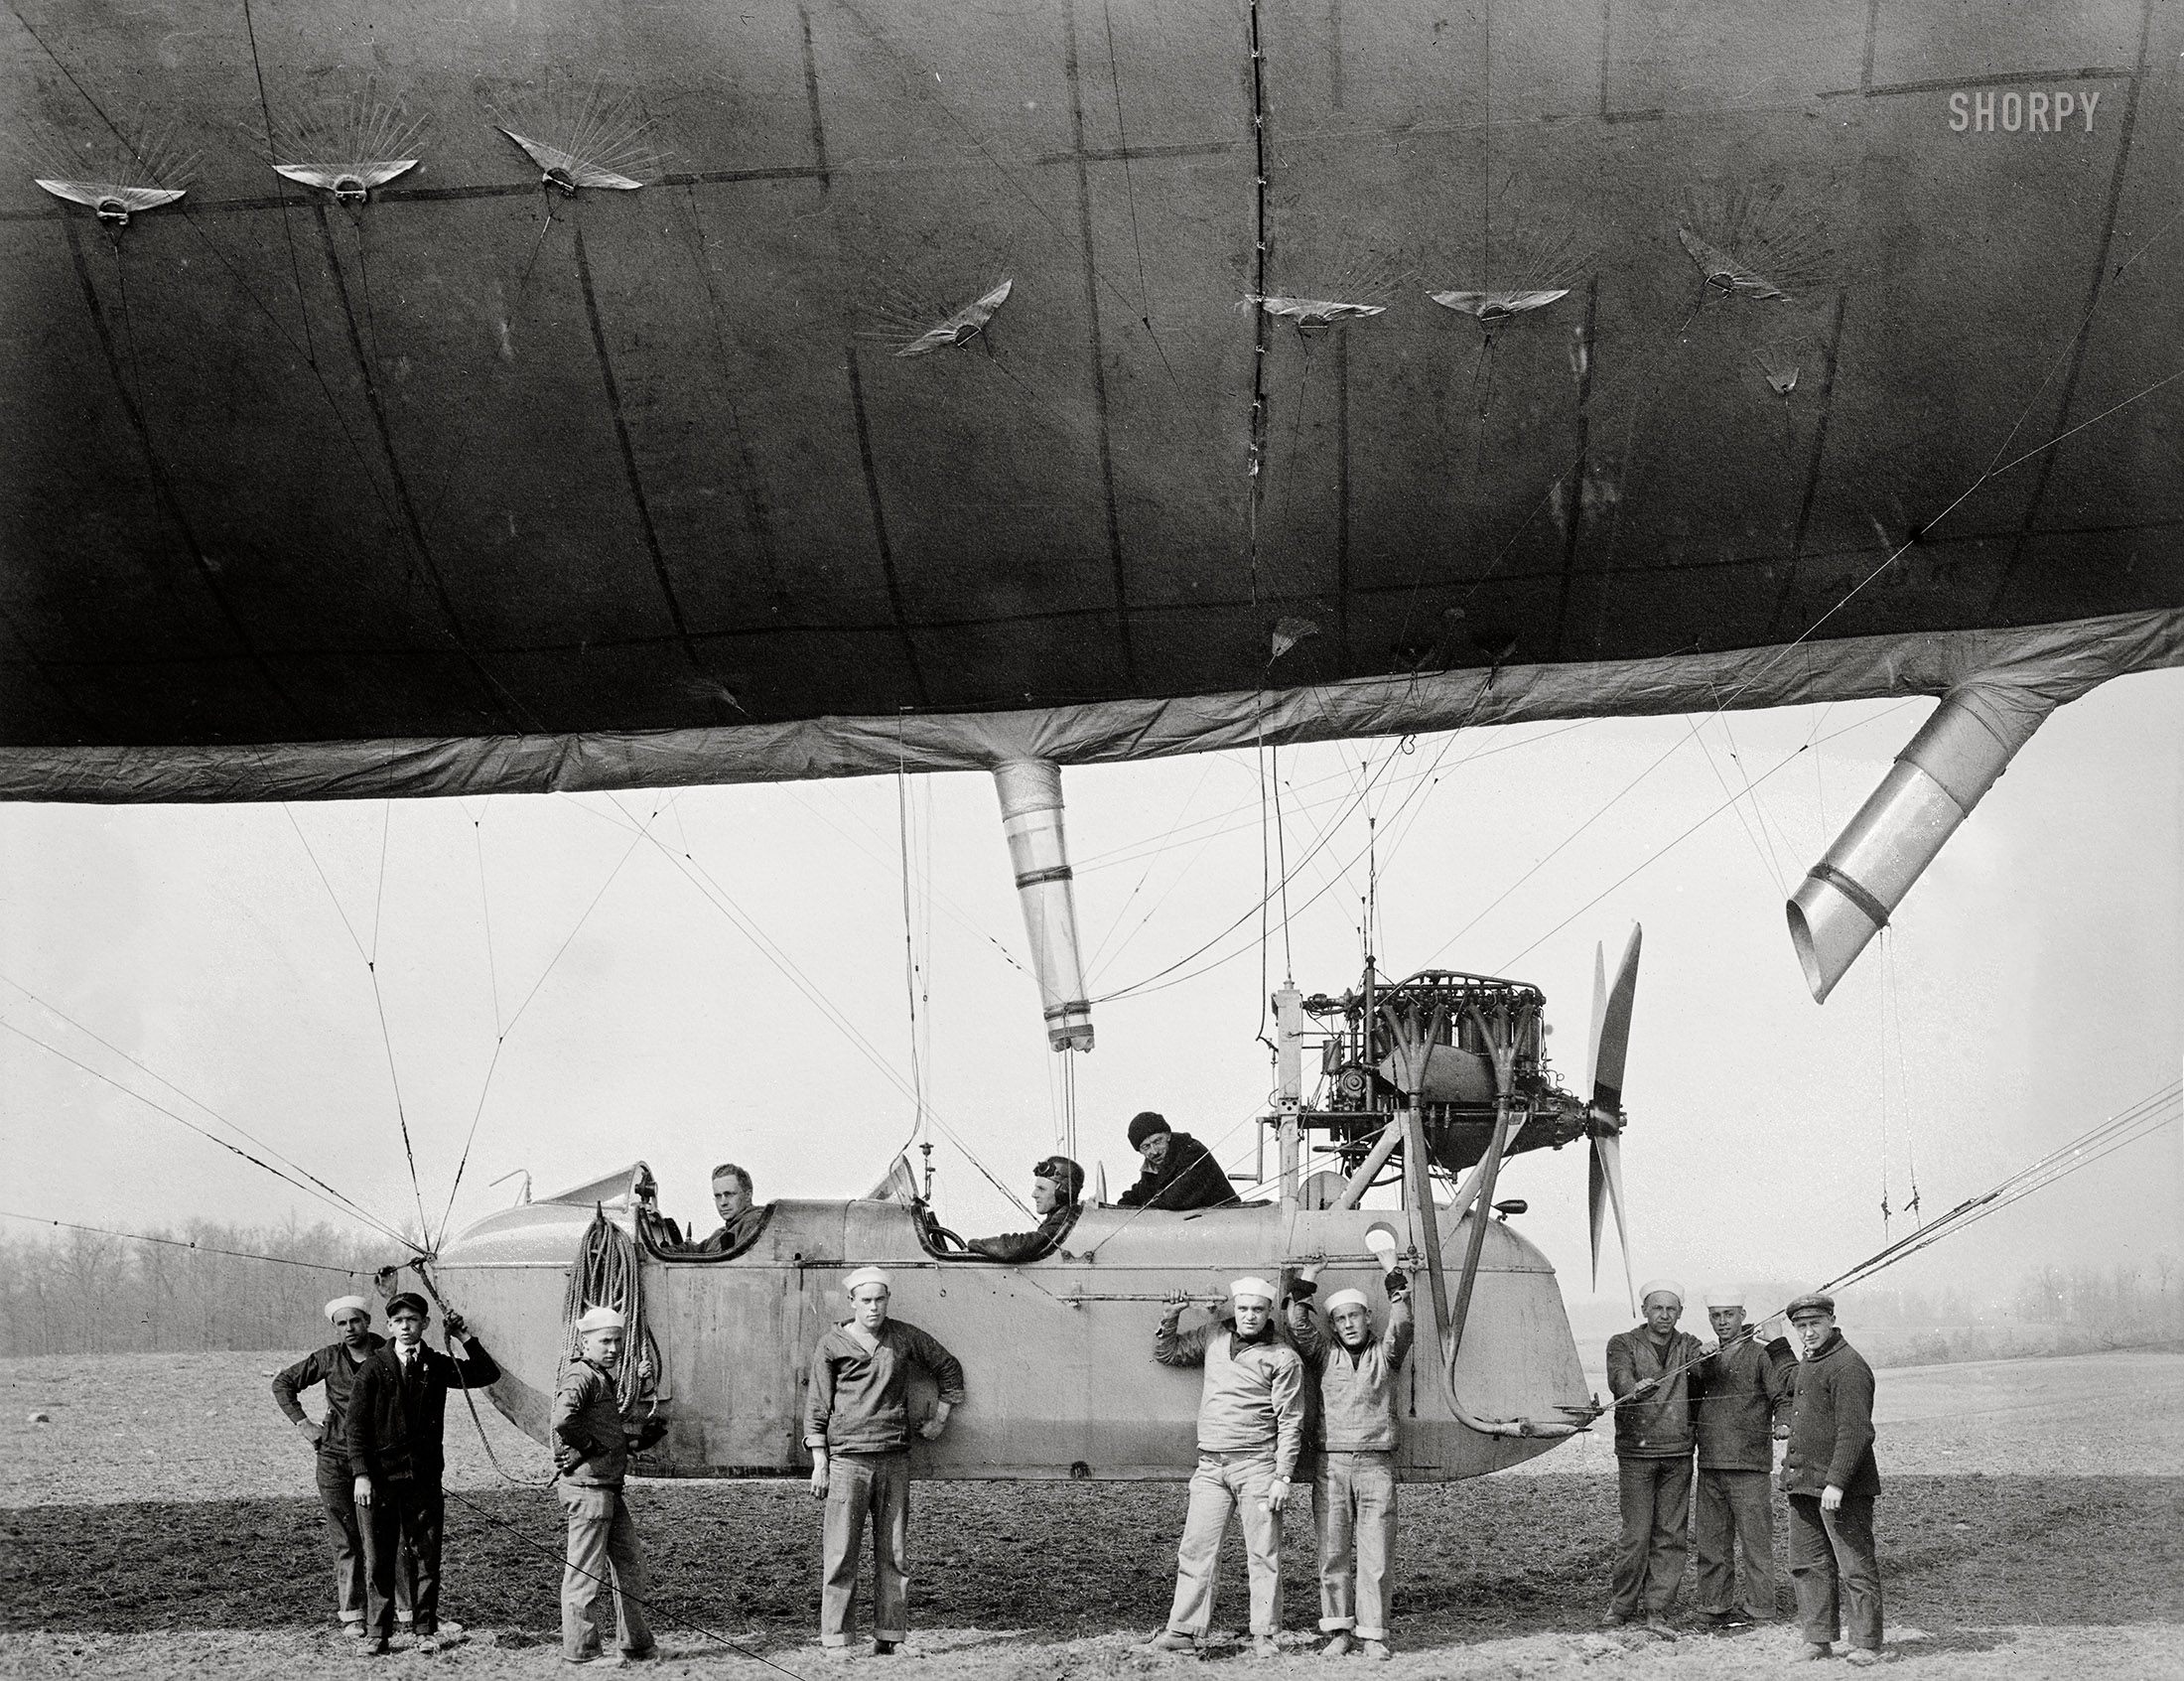 Circa 1910s. "Navy airship and crew." 5x7 glass negative, Detroit Publishing Co. View full size.